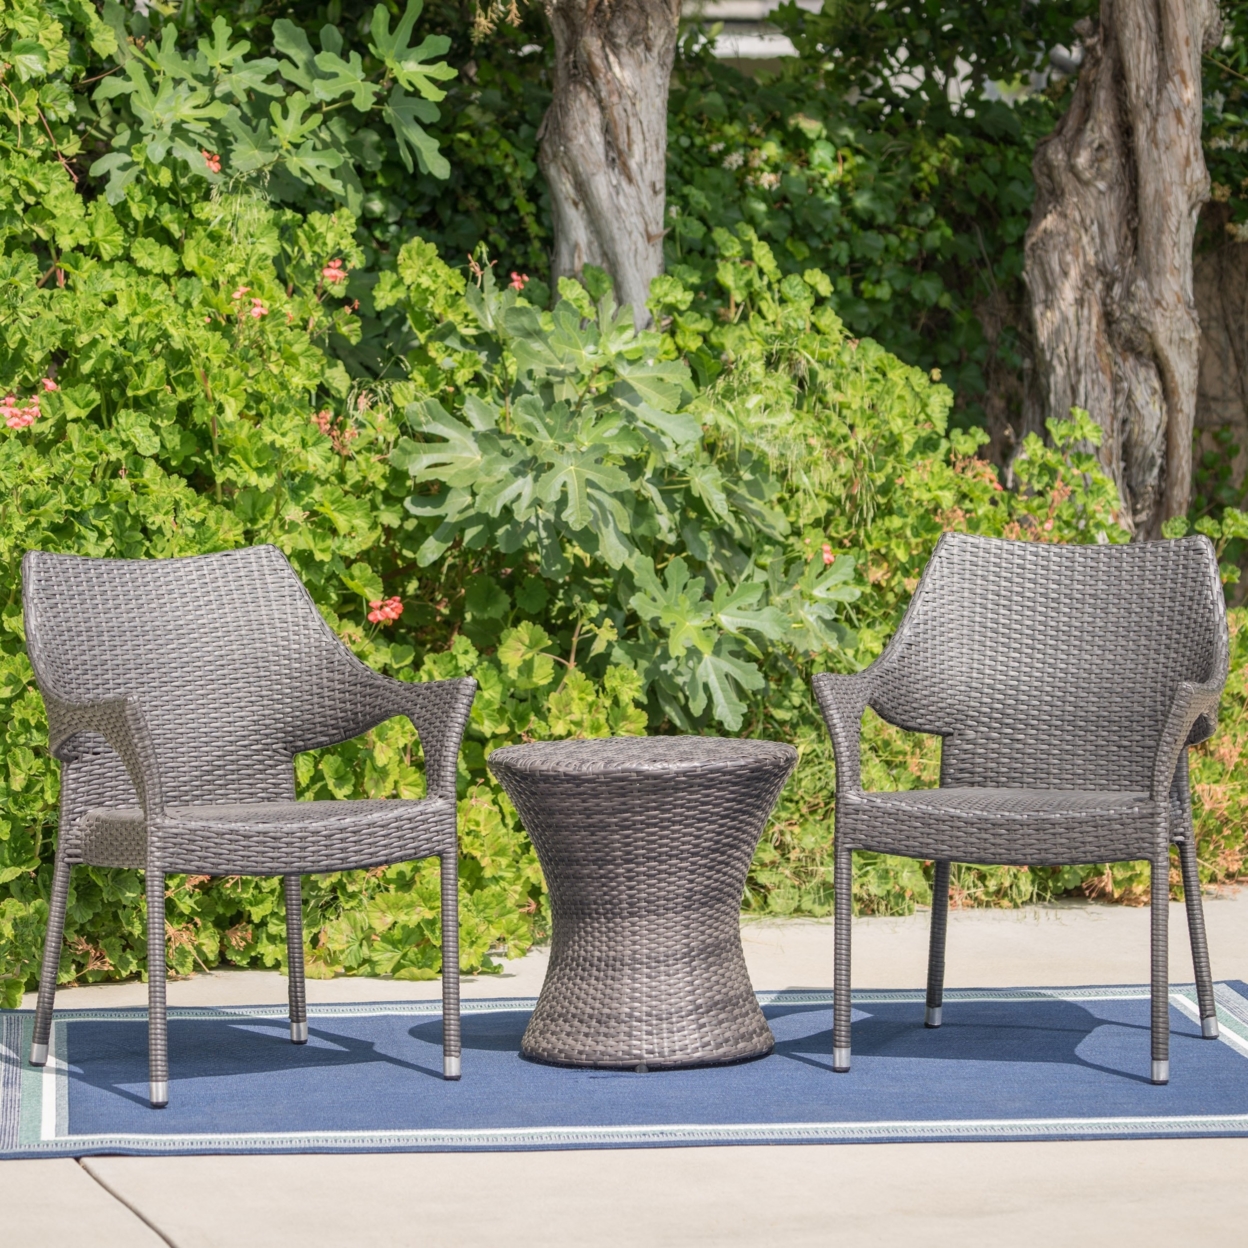 Alfheimr Outdoor 3 Piece Grey Wicker Stacking Chair Chat Set - Grey, Box Table